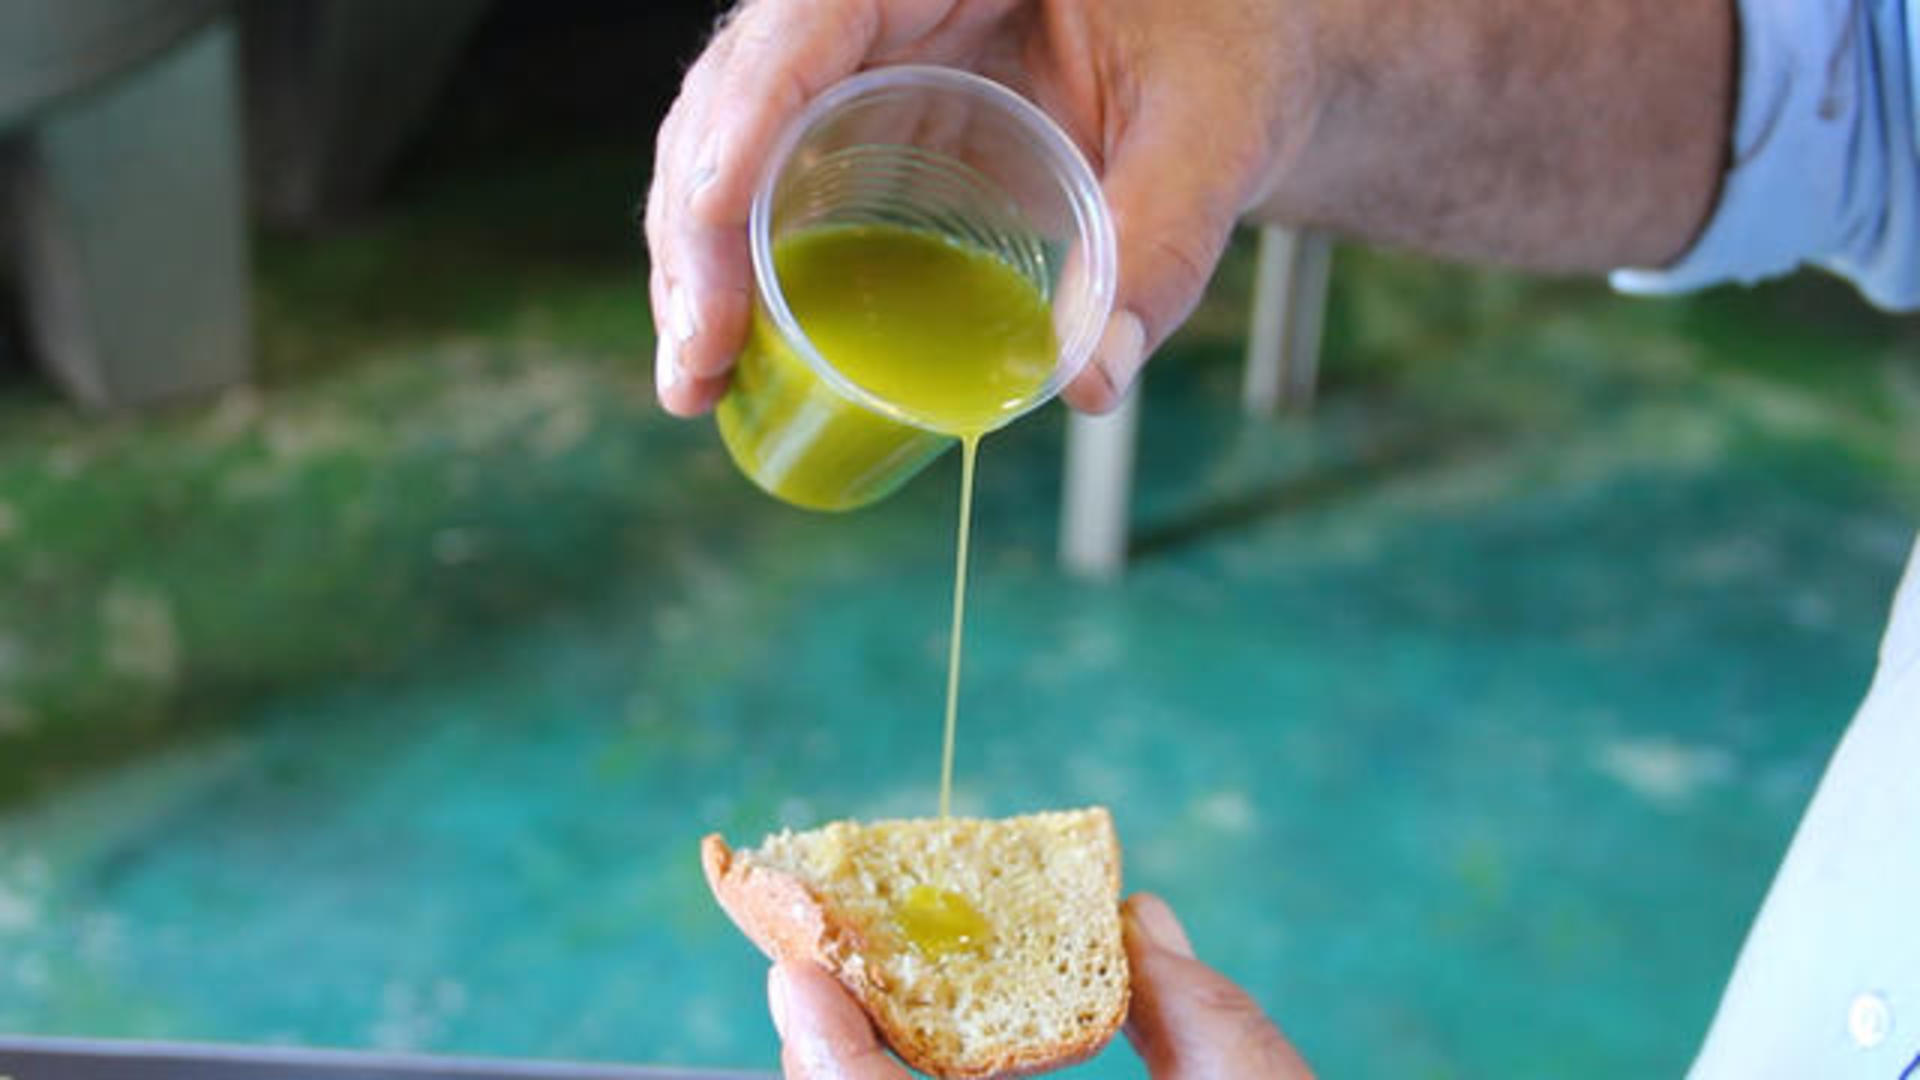 Don't fall victim to olive oil scam